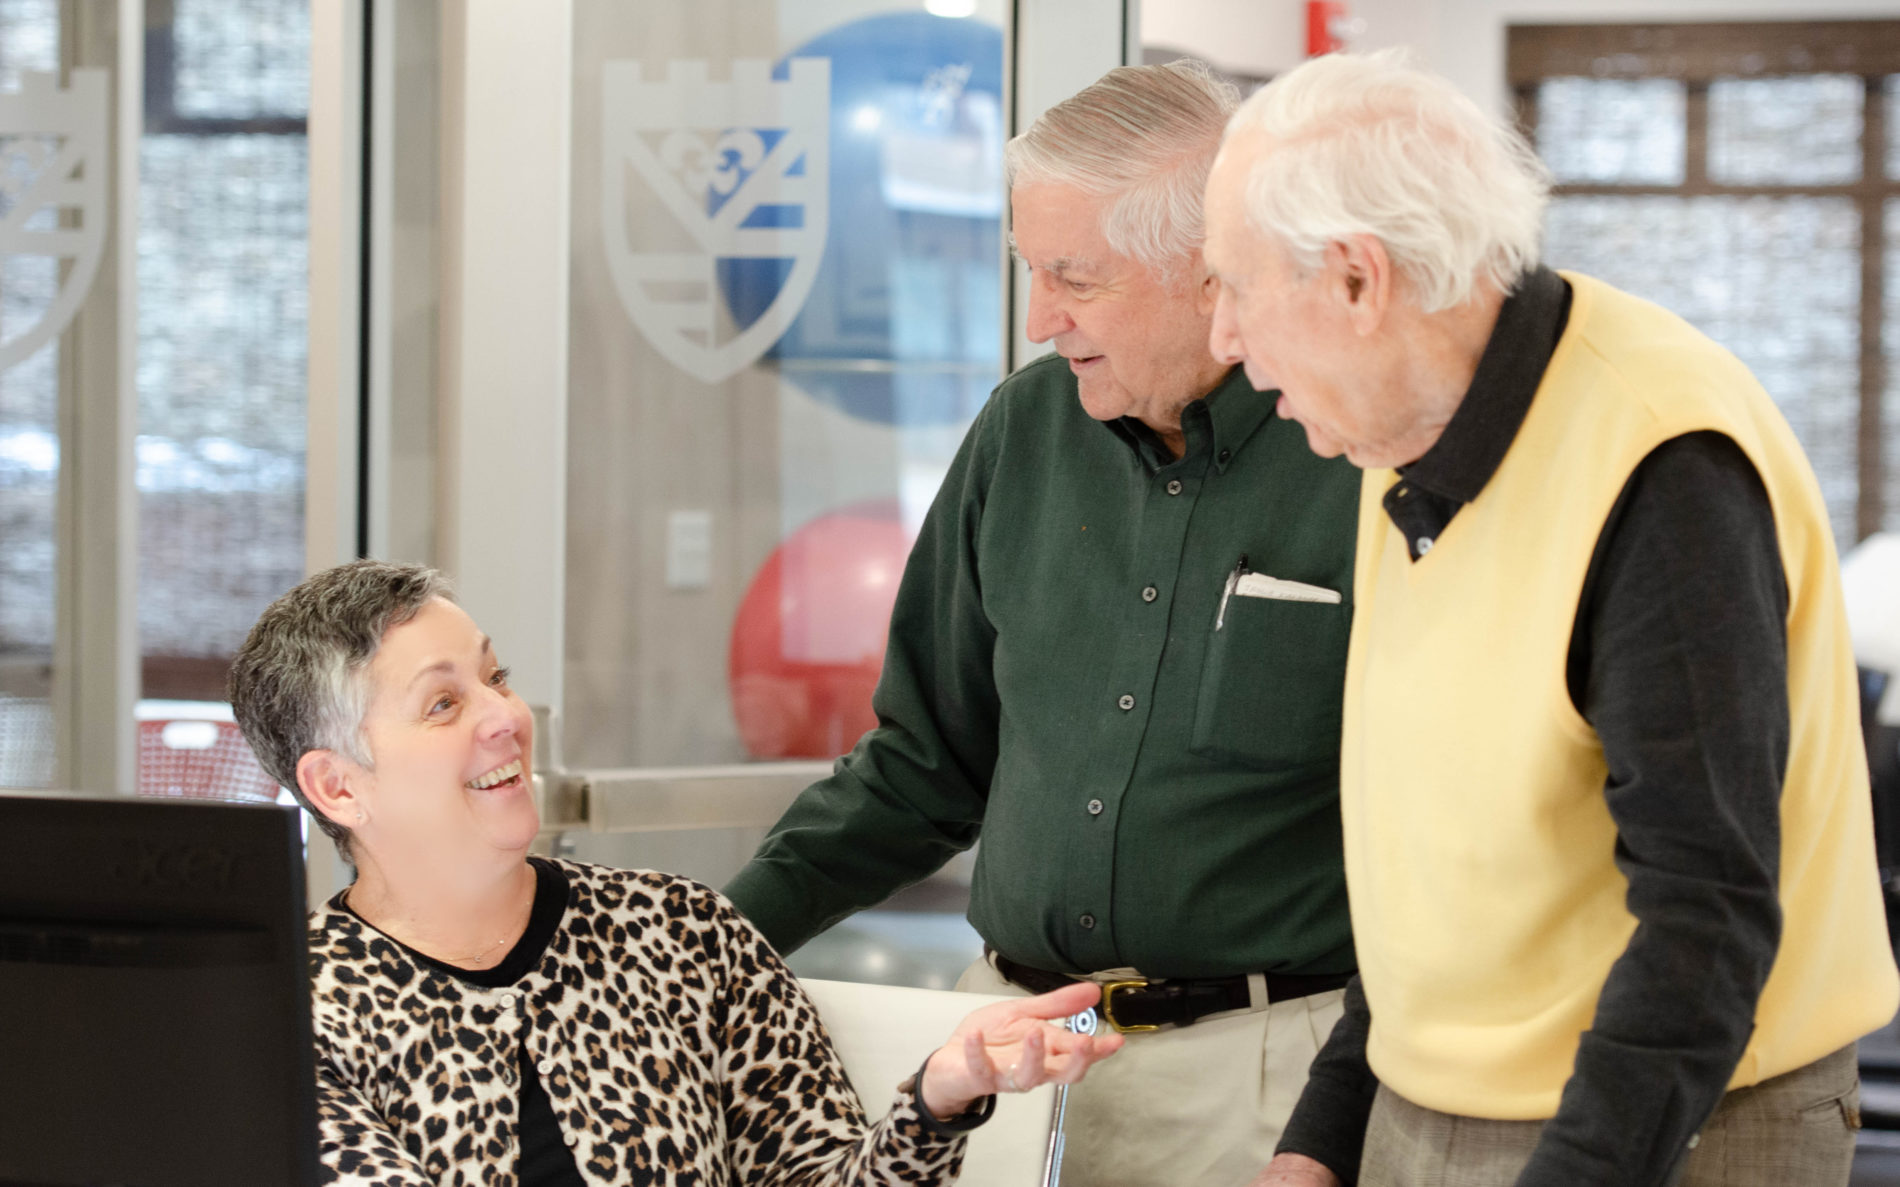 Two residents visiting with the woman at the front desk, sharing conversation and smiling